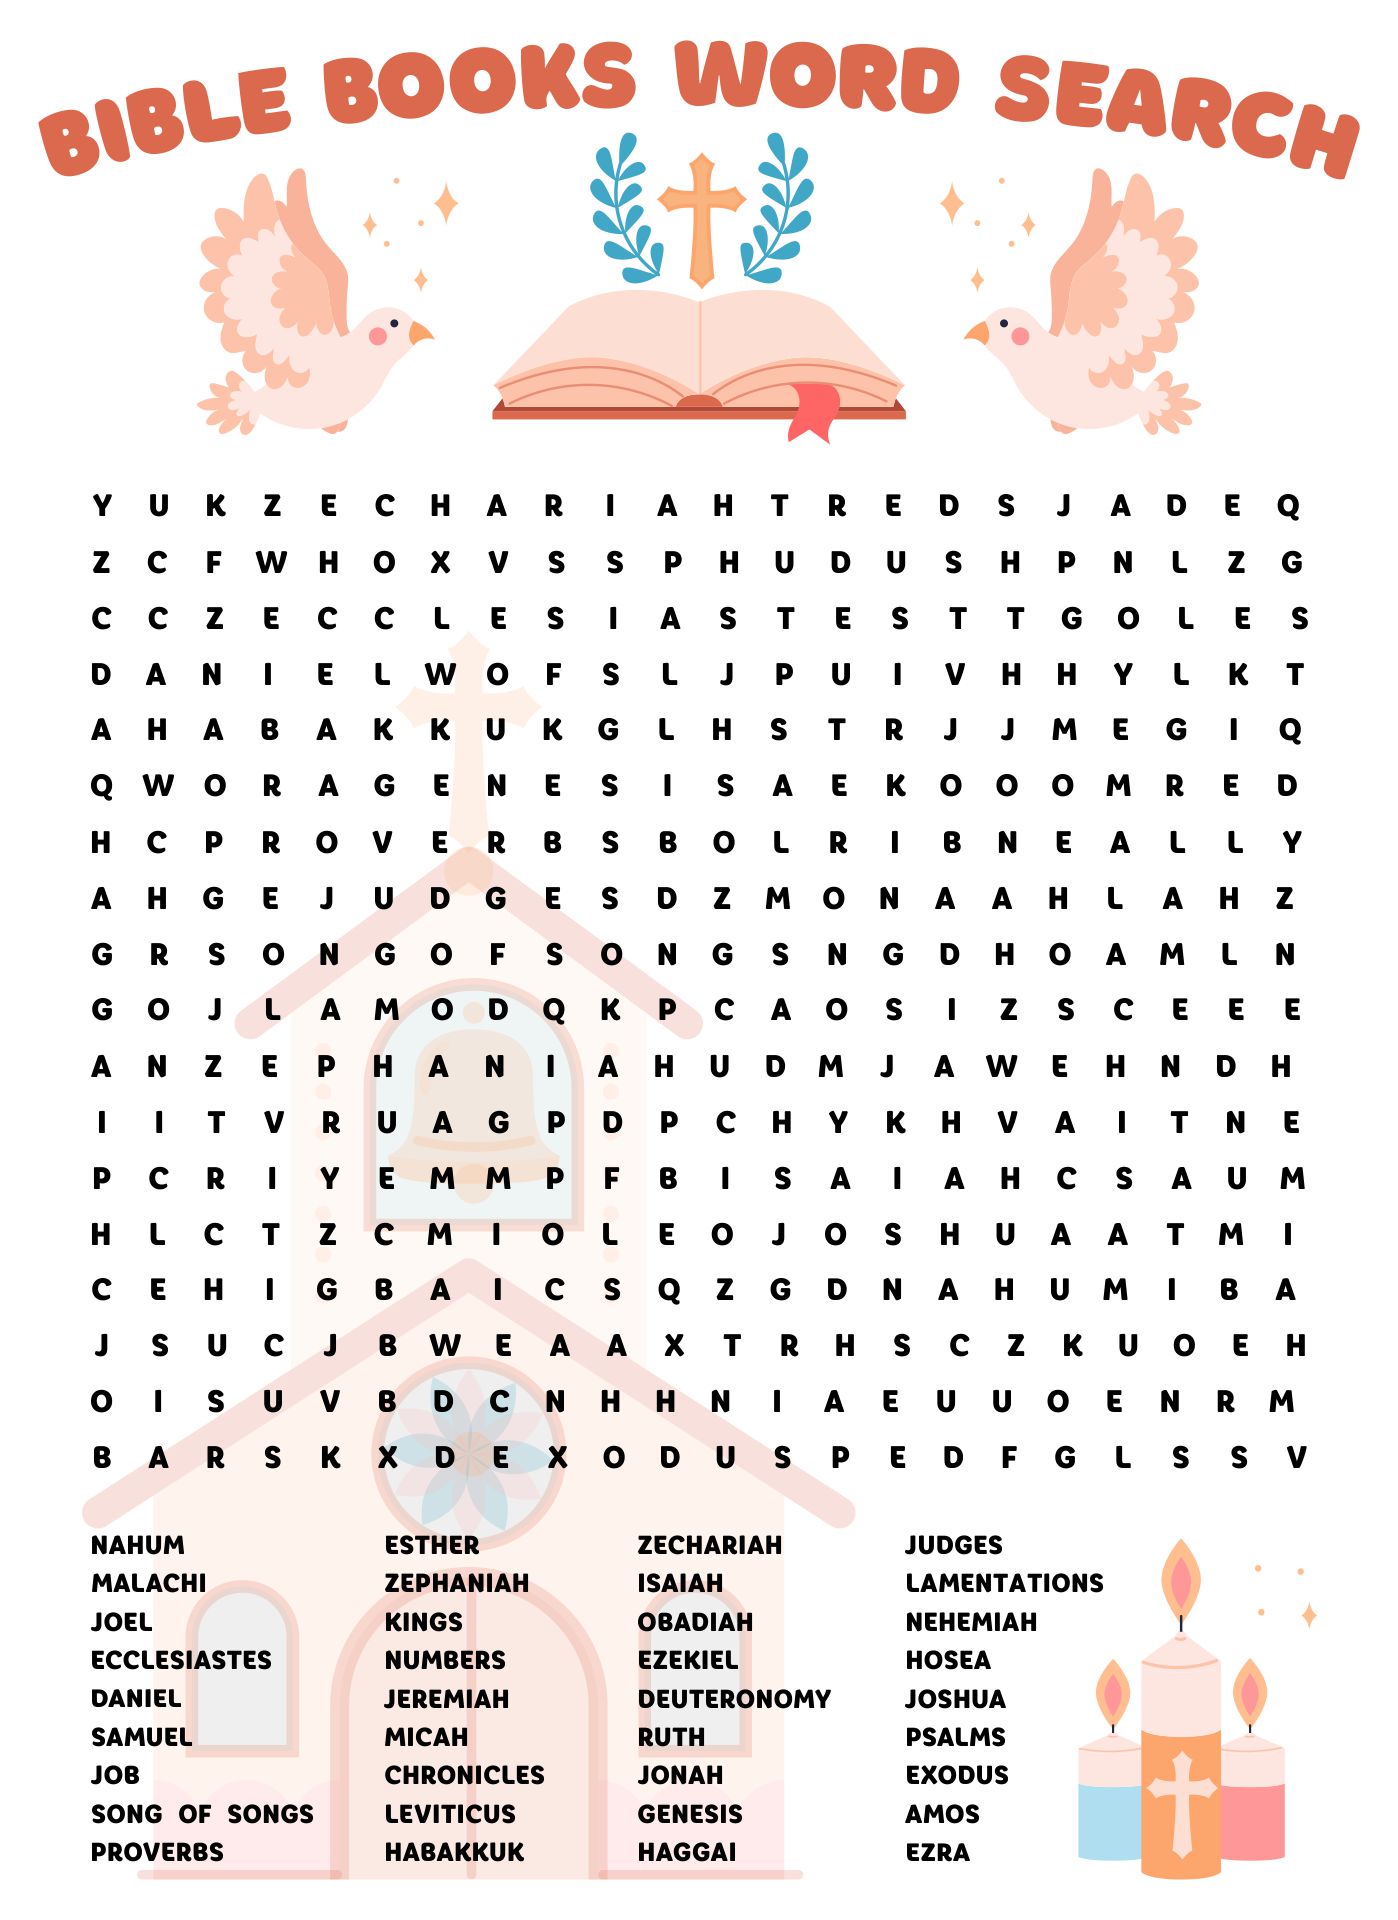 5 Best Images of Biblical Word Search Printable Free Bible Word